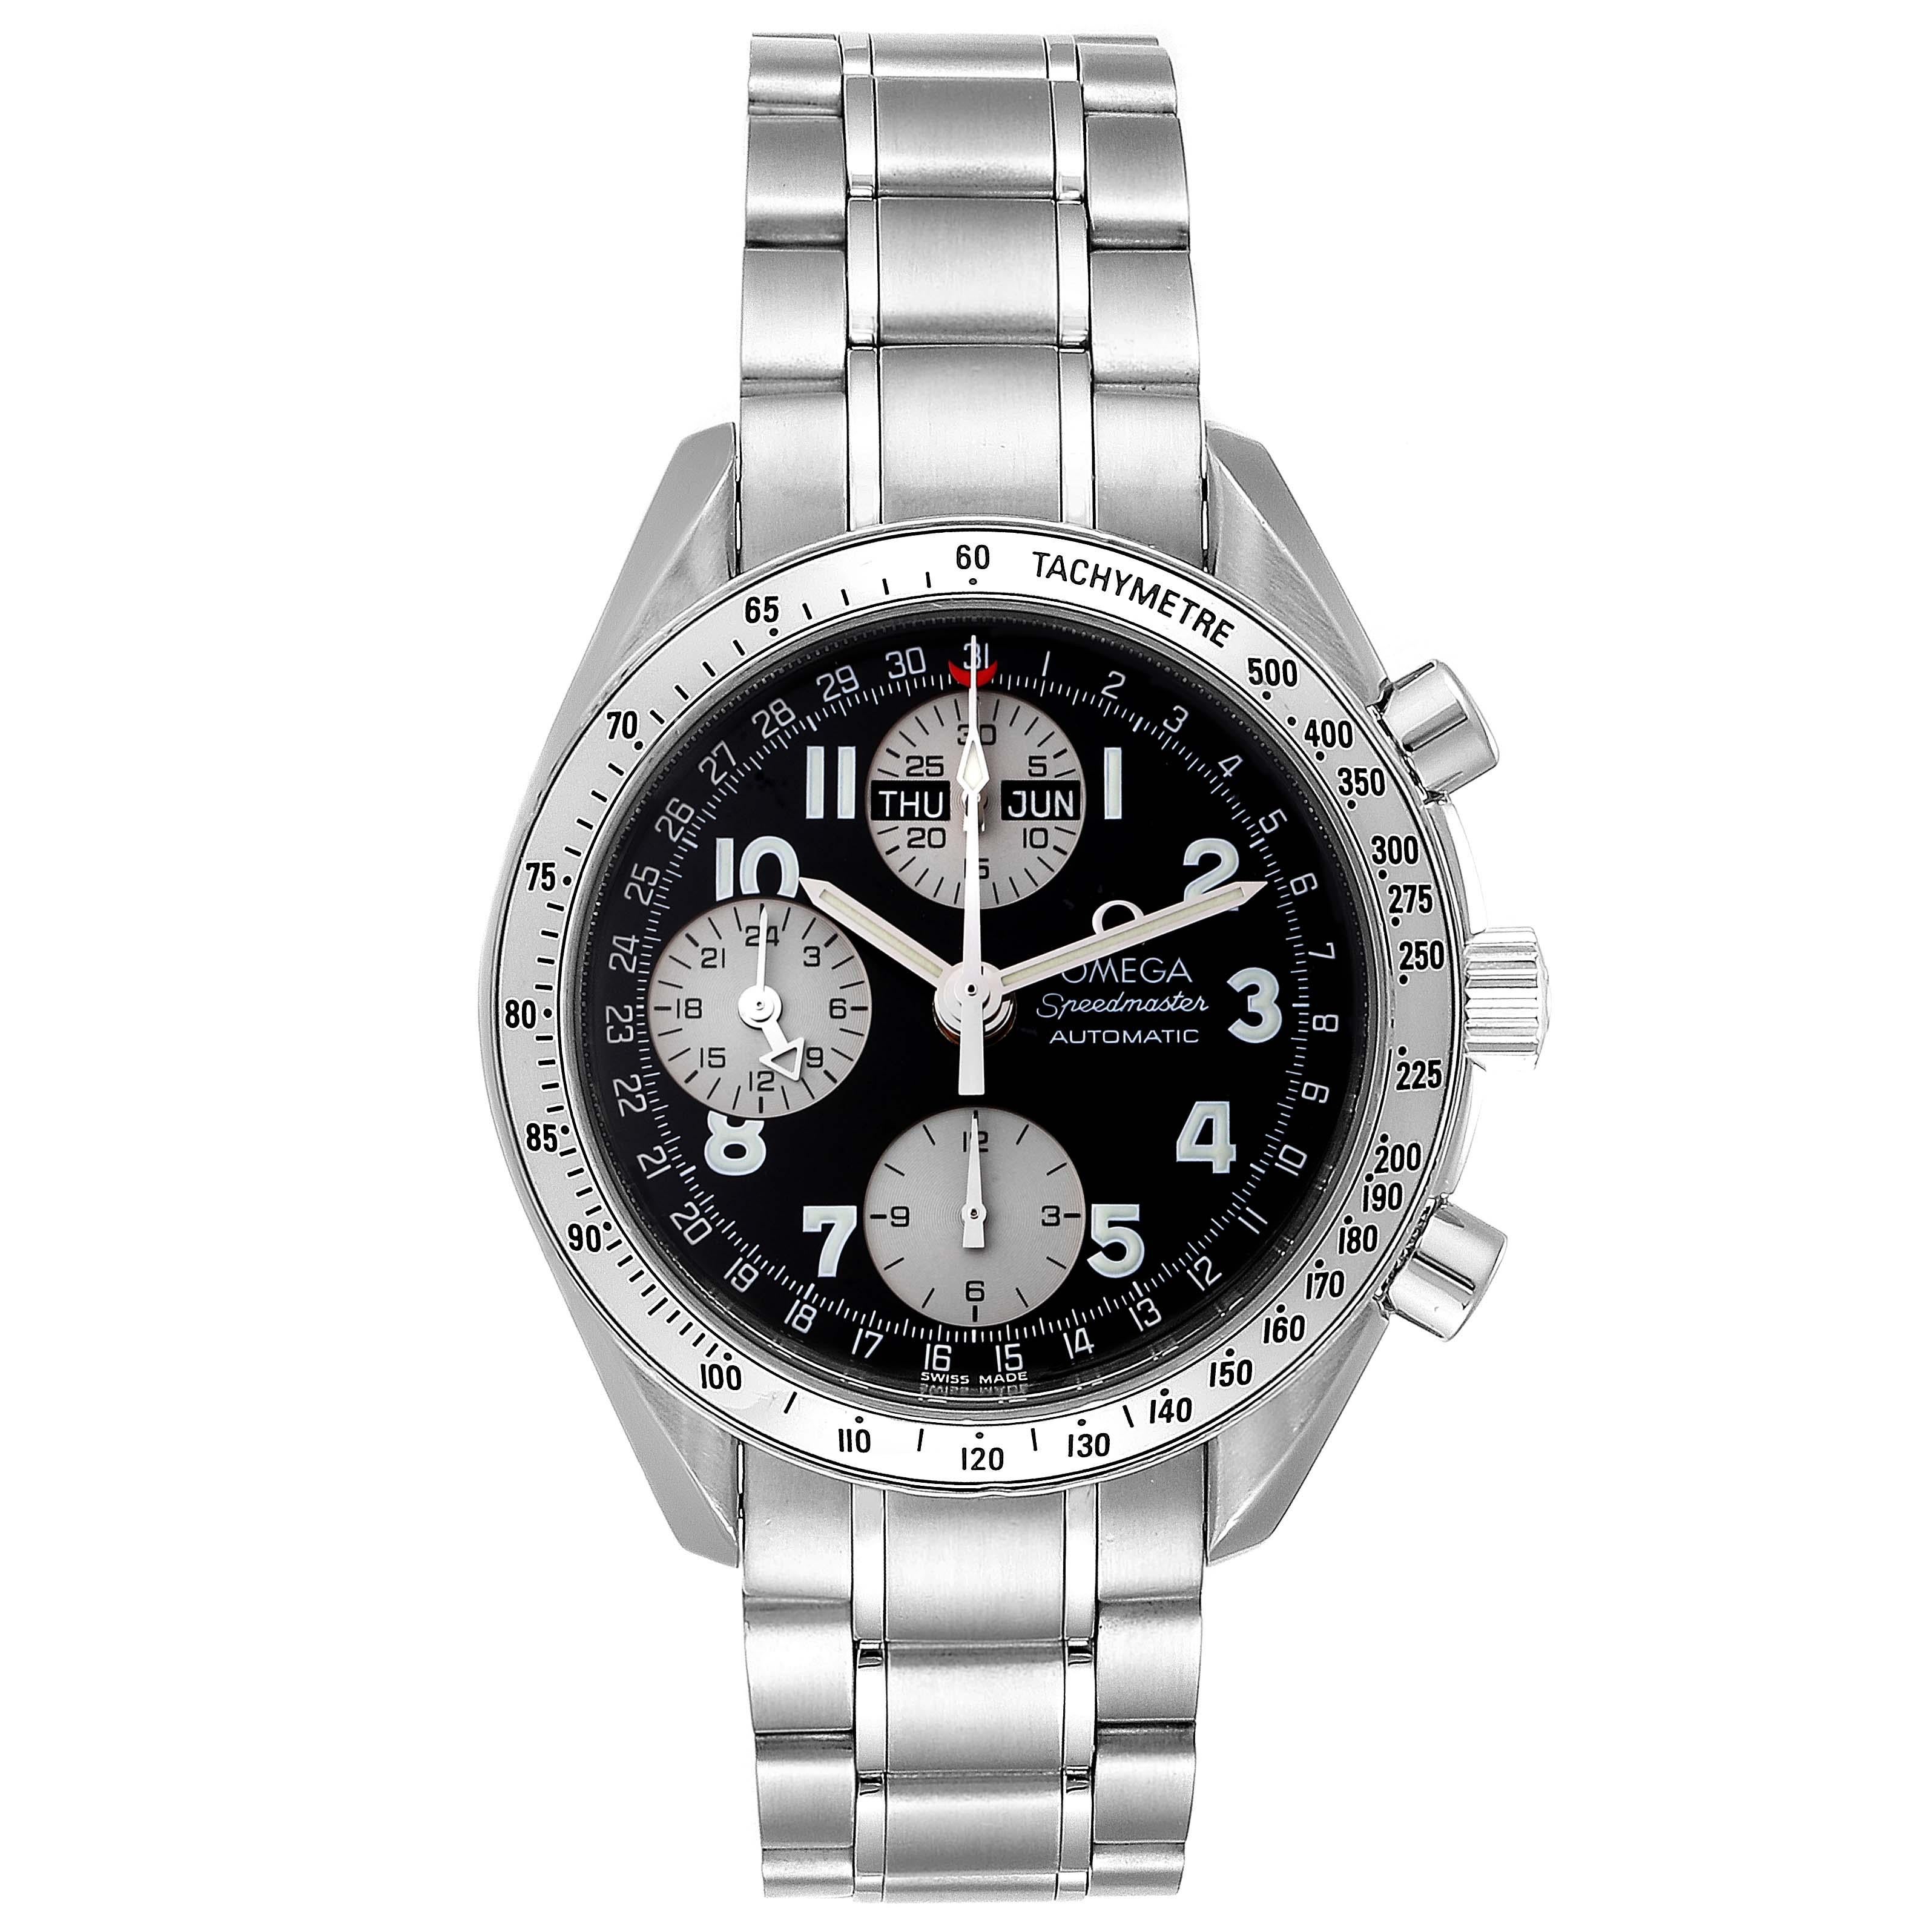 Omega Speedmaster Tripple Calendar Black Arabic Dial Watch 3523.51.00. Automatic self-winding chronograph movement. Stainless steel round case 39.0 mm in diameter. Fixed stainless steel bezel with tachymetric scale. Scratch-resistant sapphire